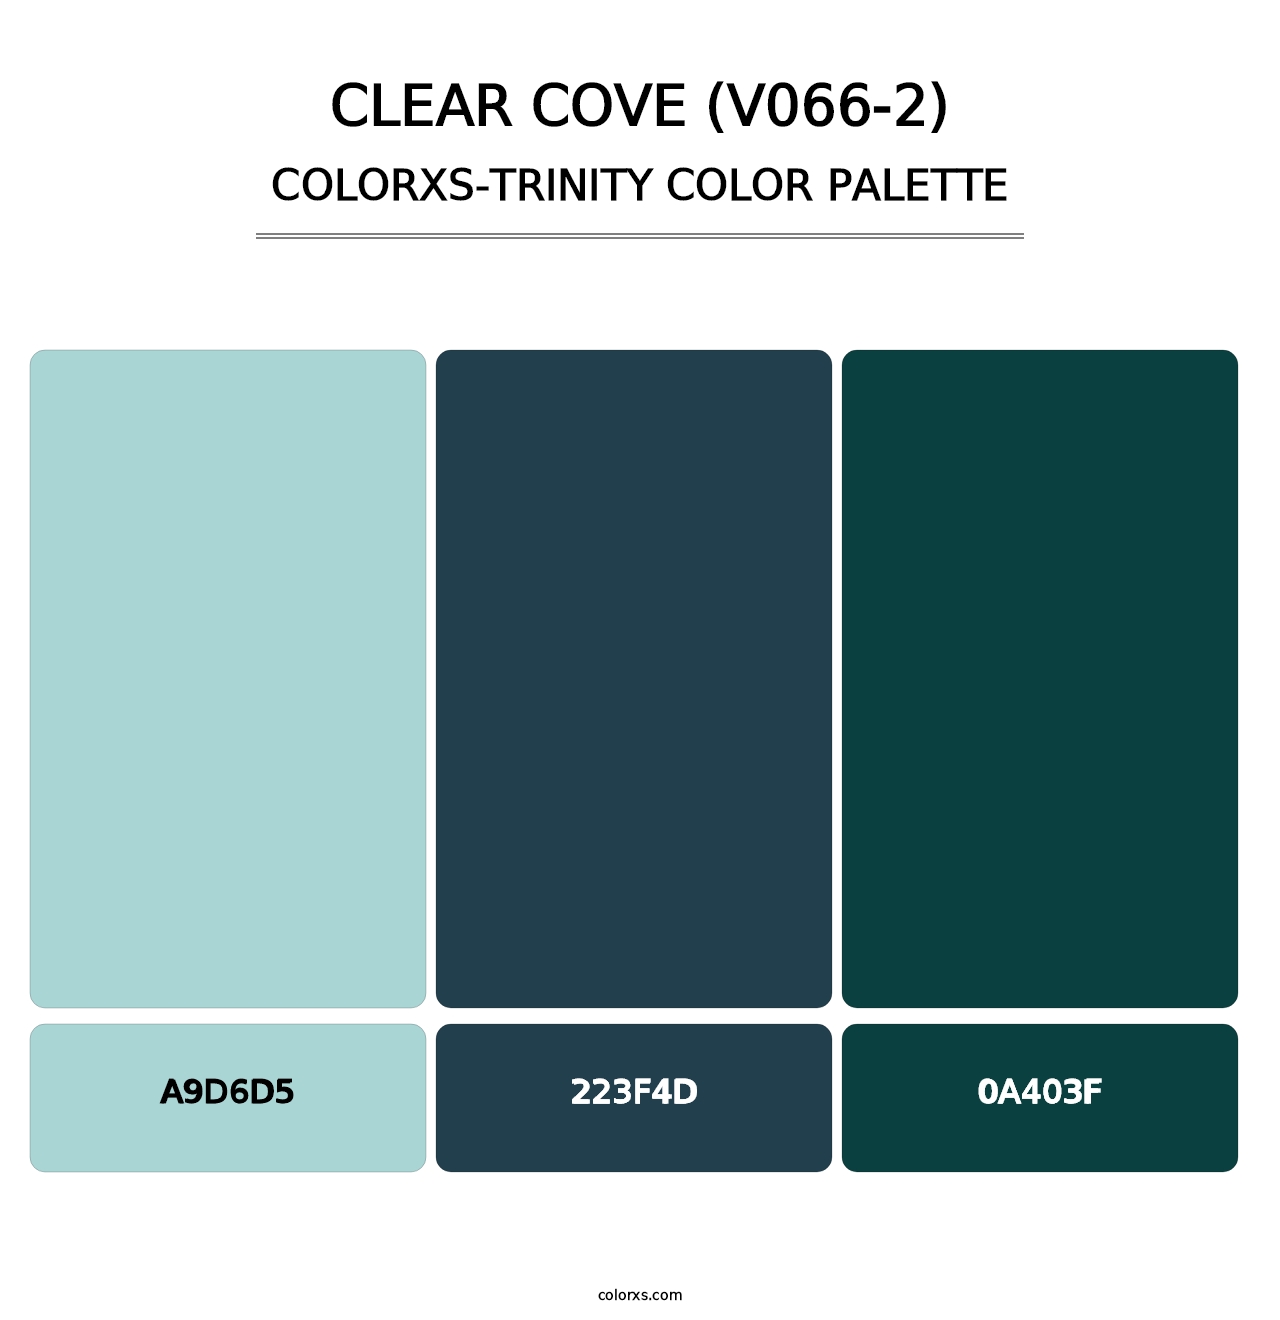 Clear Cove (V066-2) - Colorxs Trinity Palette